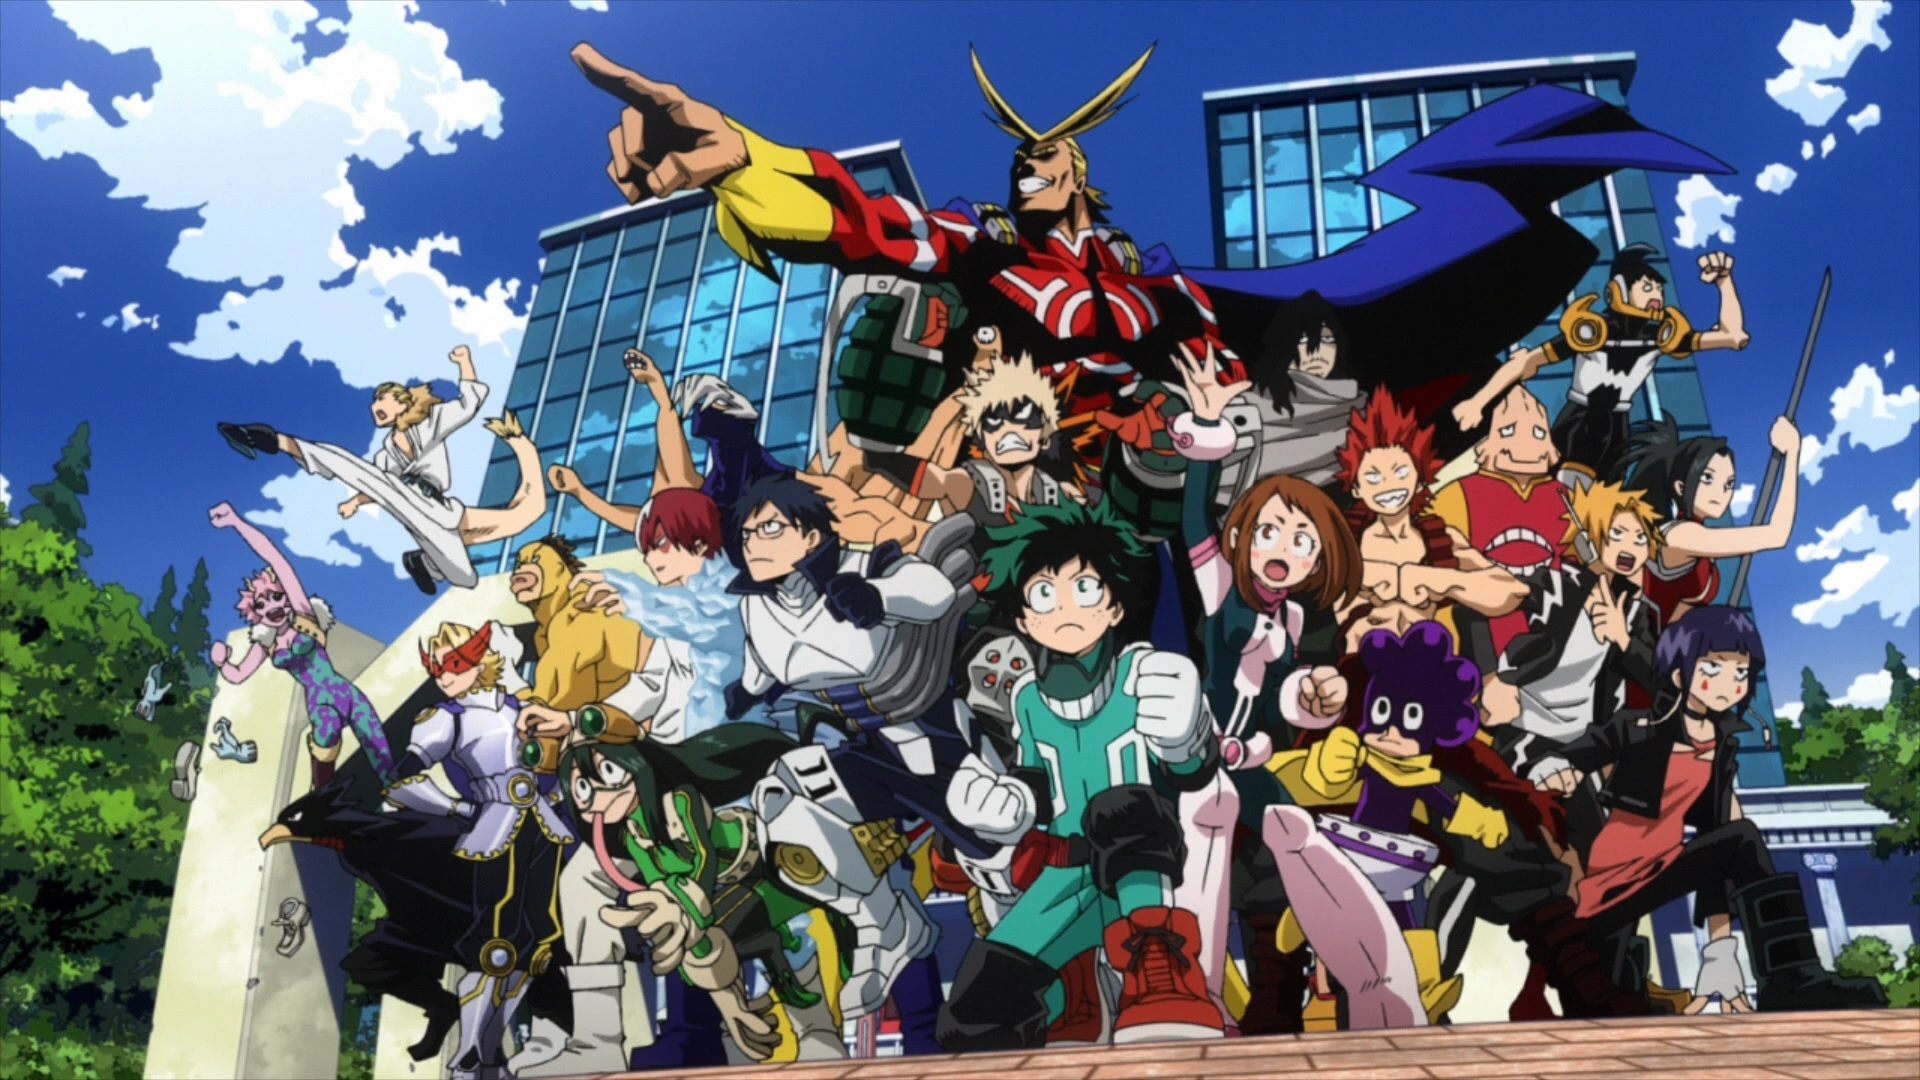 Which My Hero Academia Character Are You? Take This Quiz to Find Out